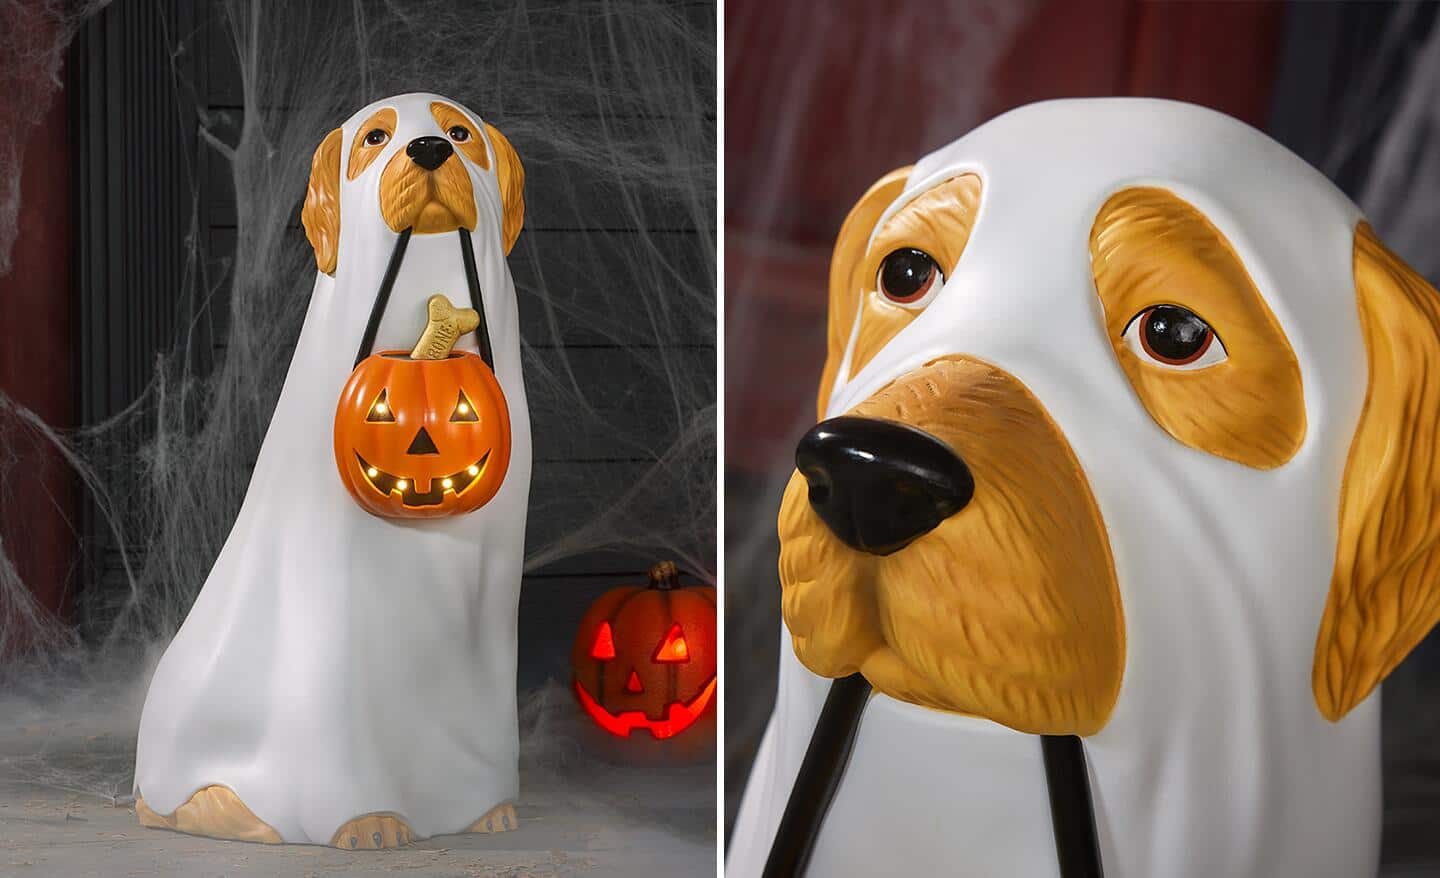 An adorable retriever statue dressed in a homemade ghost costume trick or treats on a decorated porch.